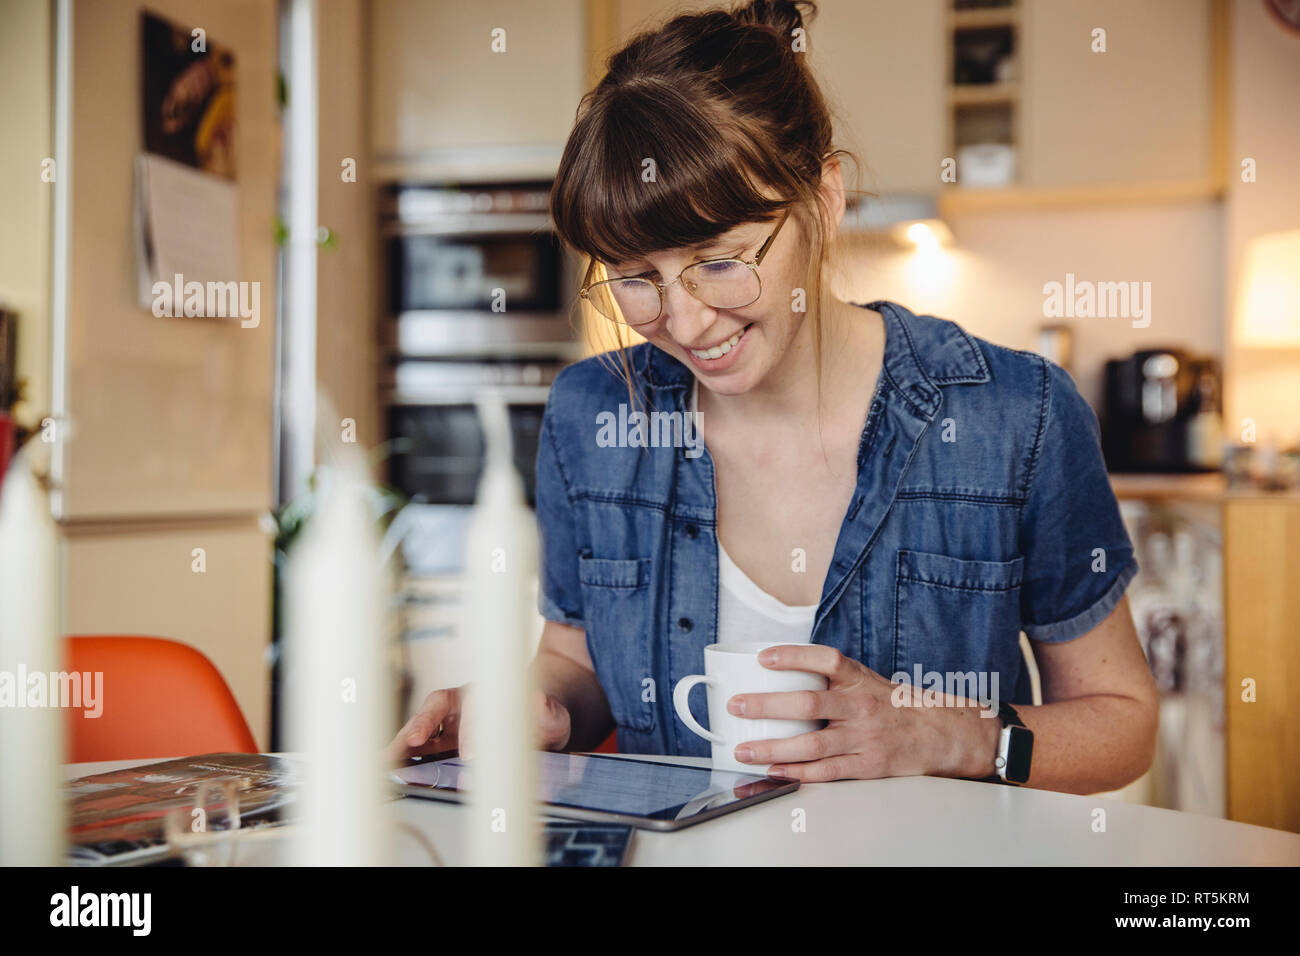 Smiling woman sitting with cup of coffee at table in the kitchen using tablet Stock Photo